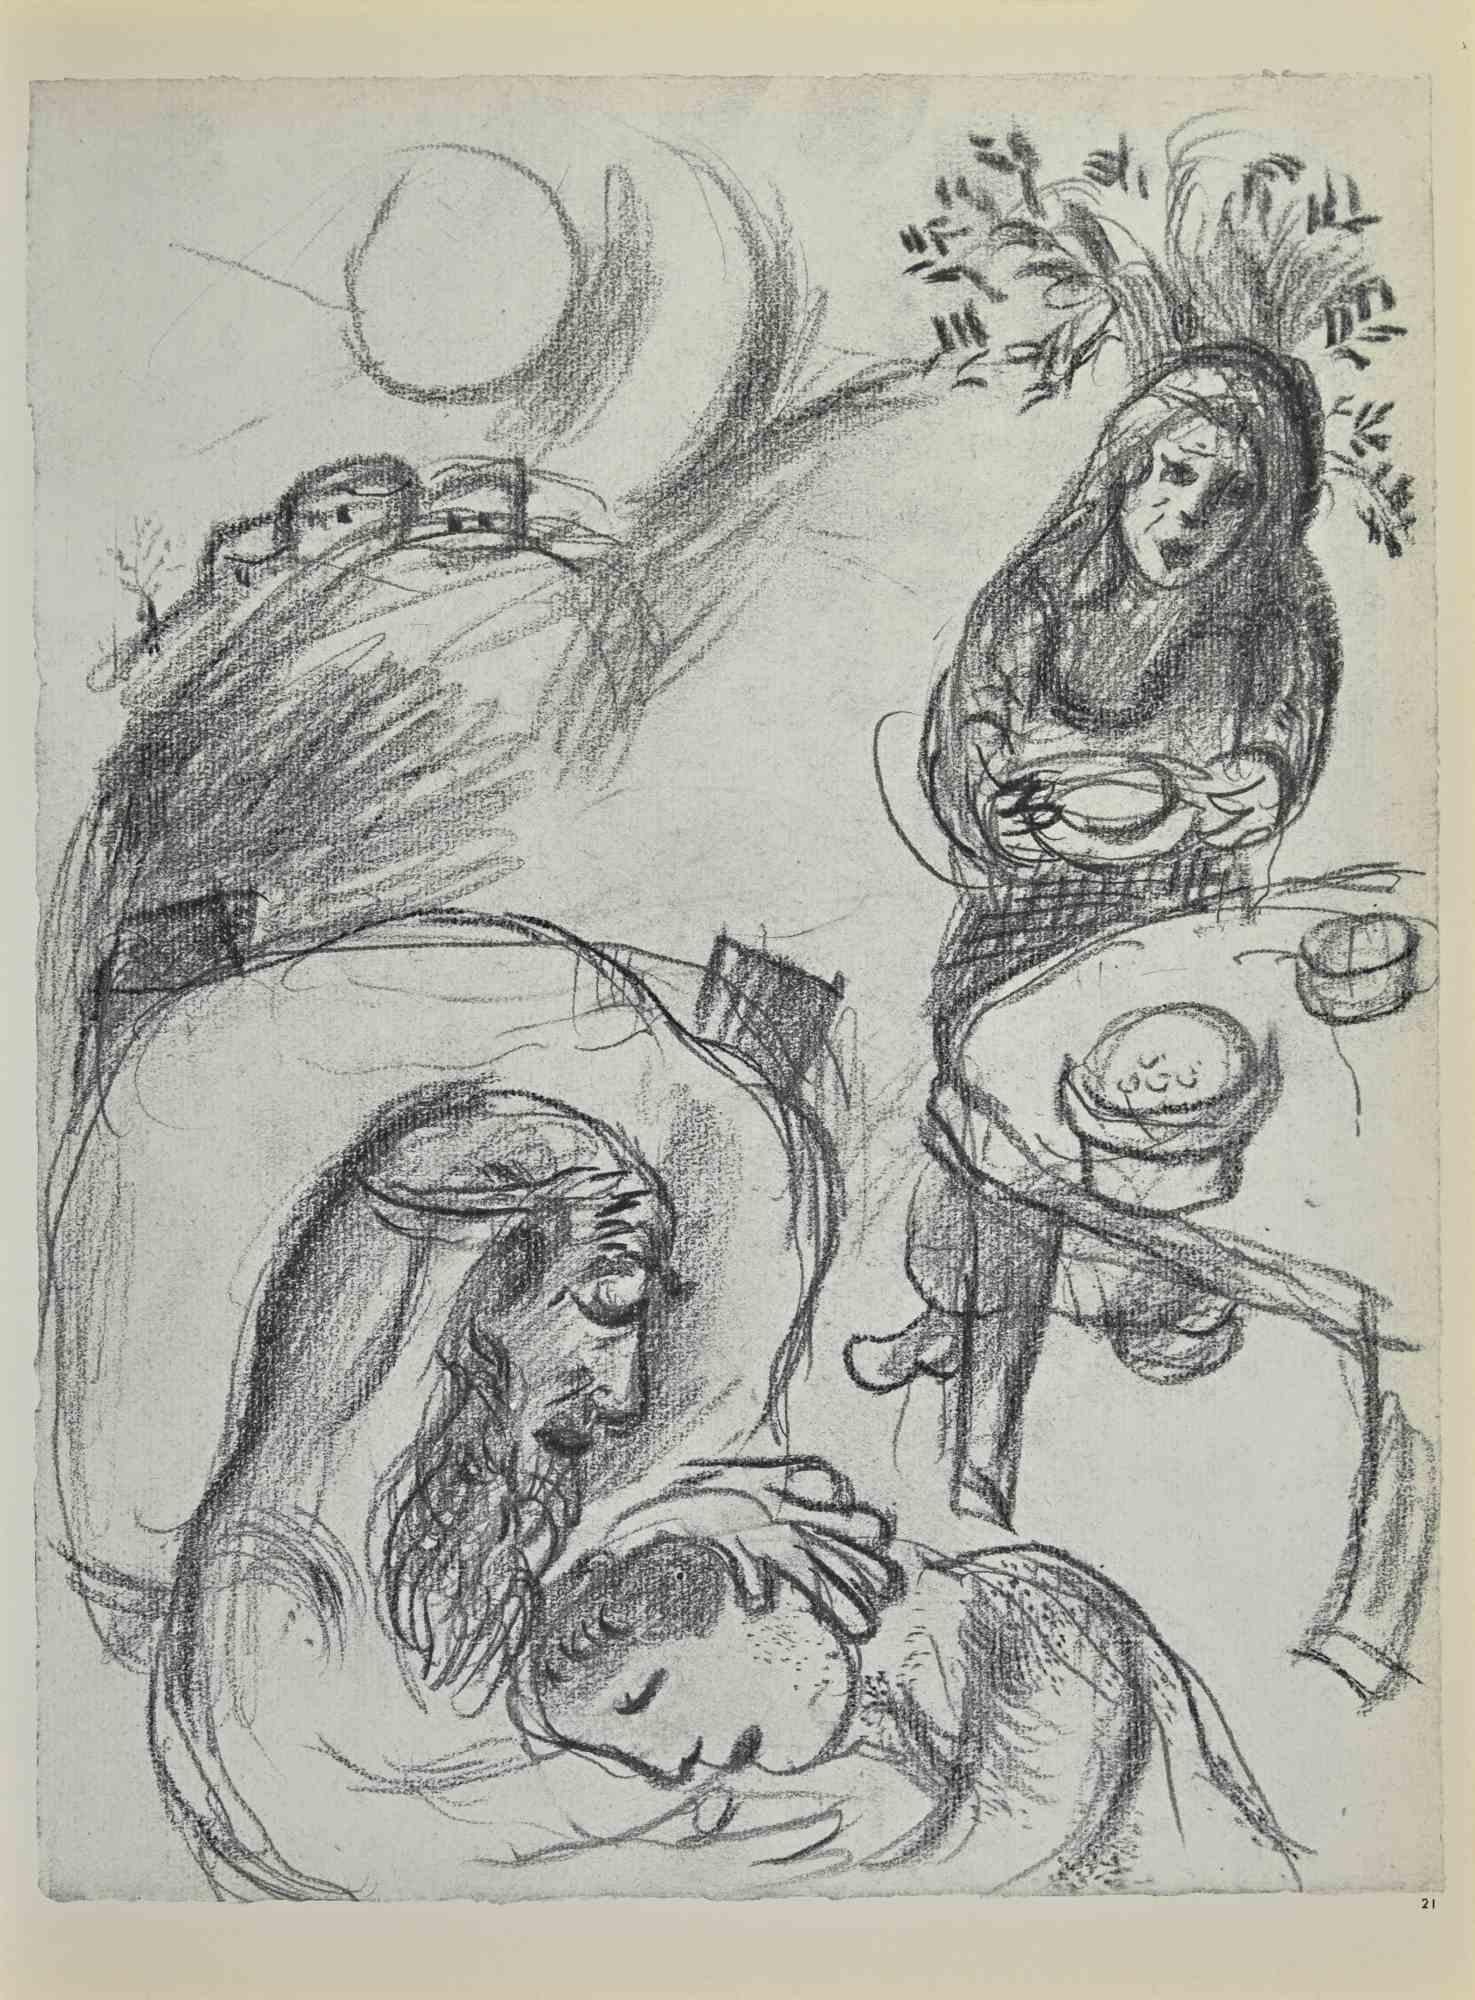 The Two Daughters of Laban is an artwork realized by March Chagall, 1960s.

Lithograph on brown-toned paper, no signature.

Lithograph on both sheets.

Edition of 6500 unsigned lithographs. Printed by Mourlot and published by Tériade, Paris.

Ref.